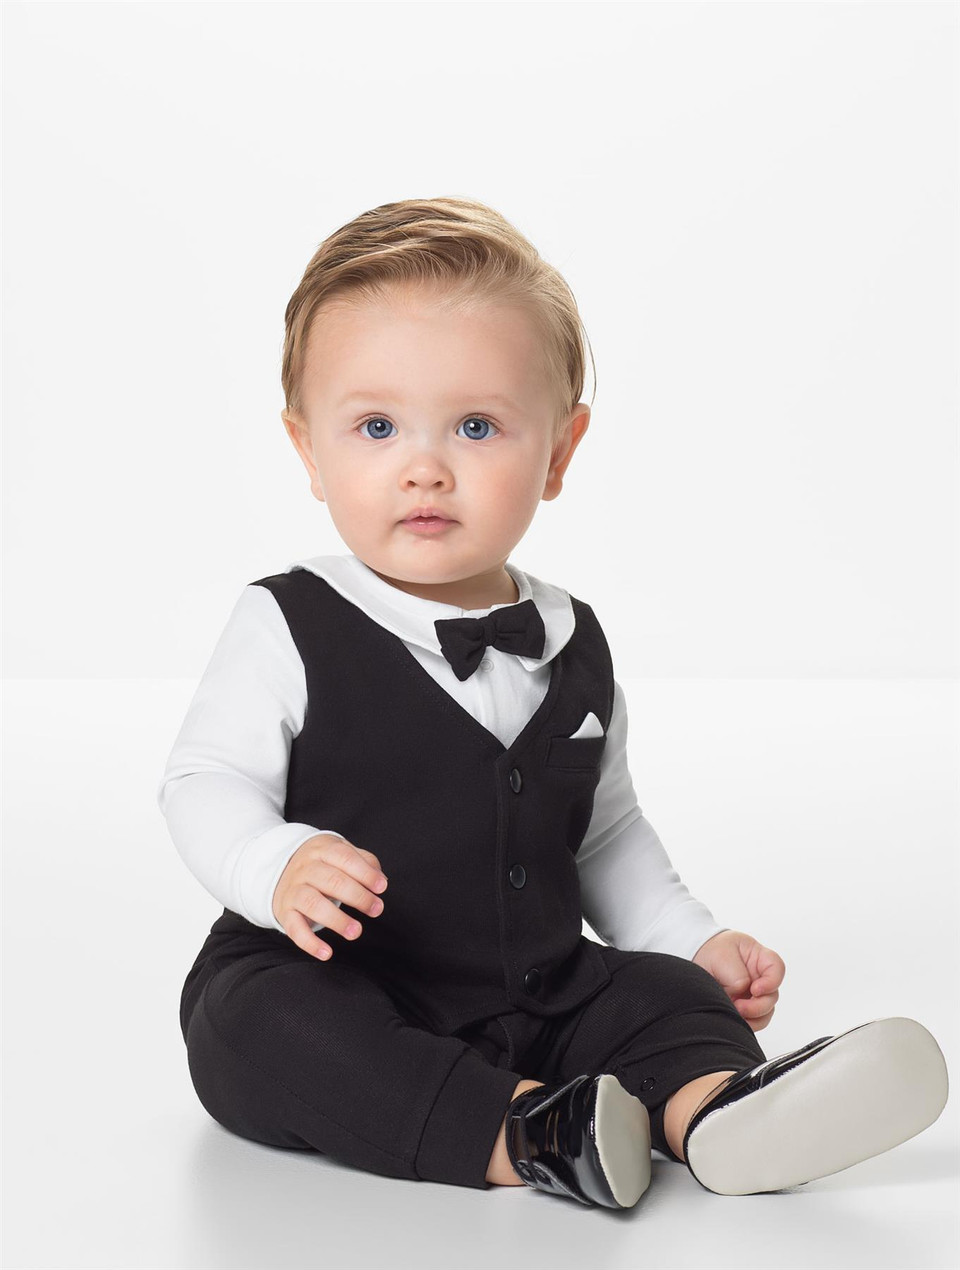 Baby boys suits | Babies wedding suits | Toddler suits